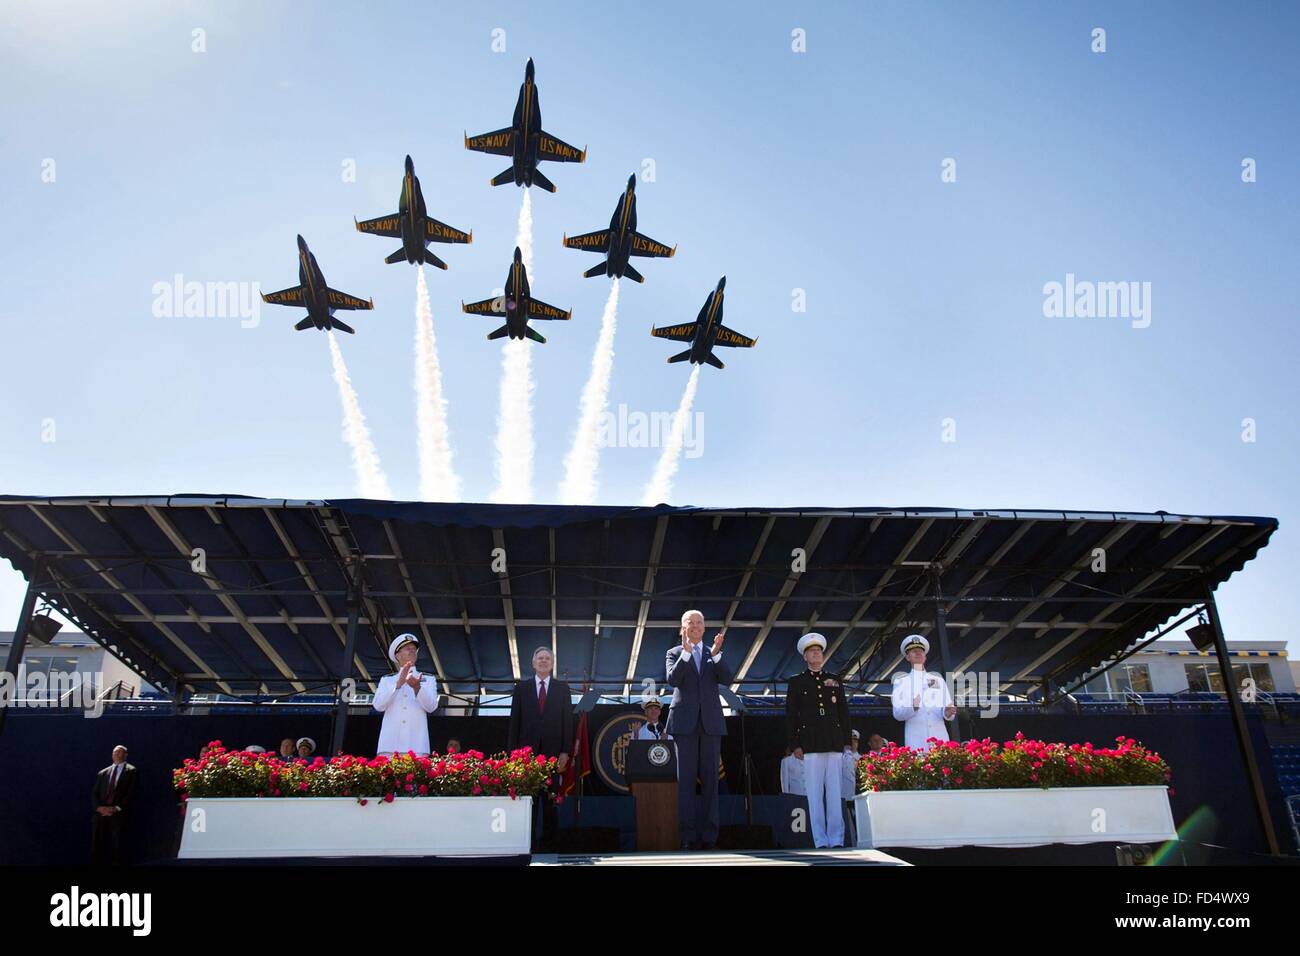 The Navy Blue Angels flyover as the Vice President Joe Biden and other officials applauded during the commencement ceremonies at the Naval Academy May 22, 2015 in Annapolis, Maryland. Stock Photo